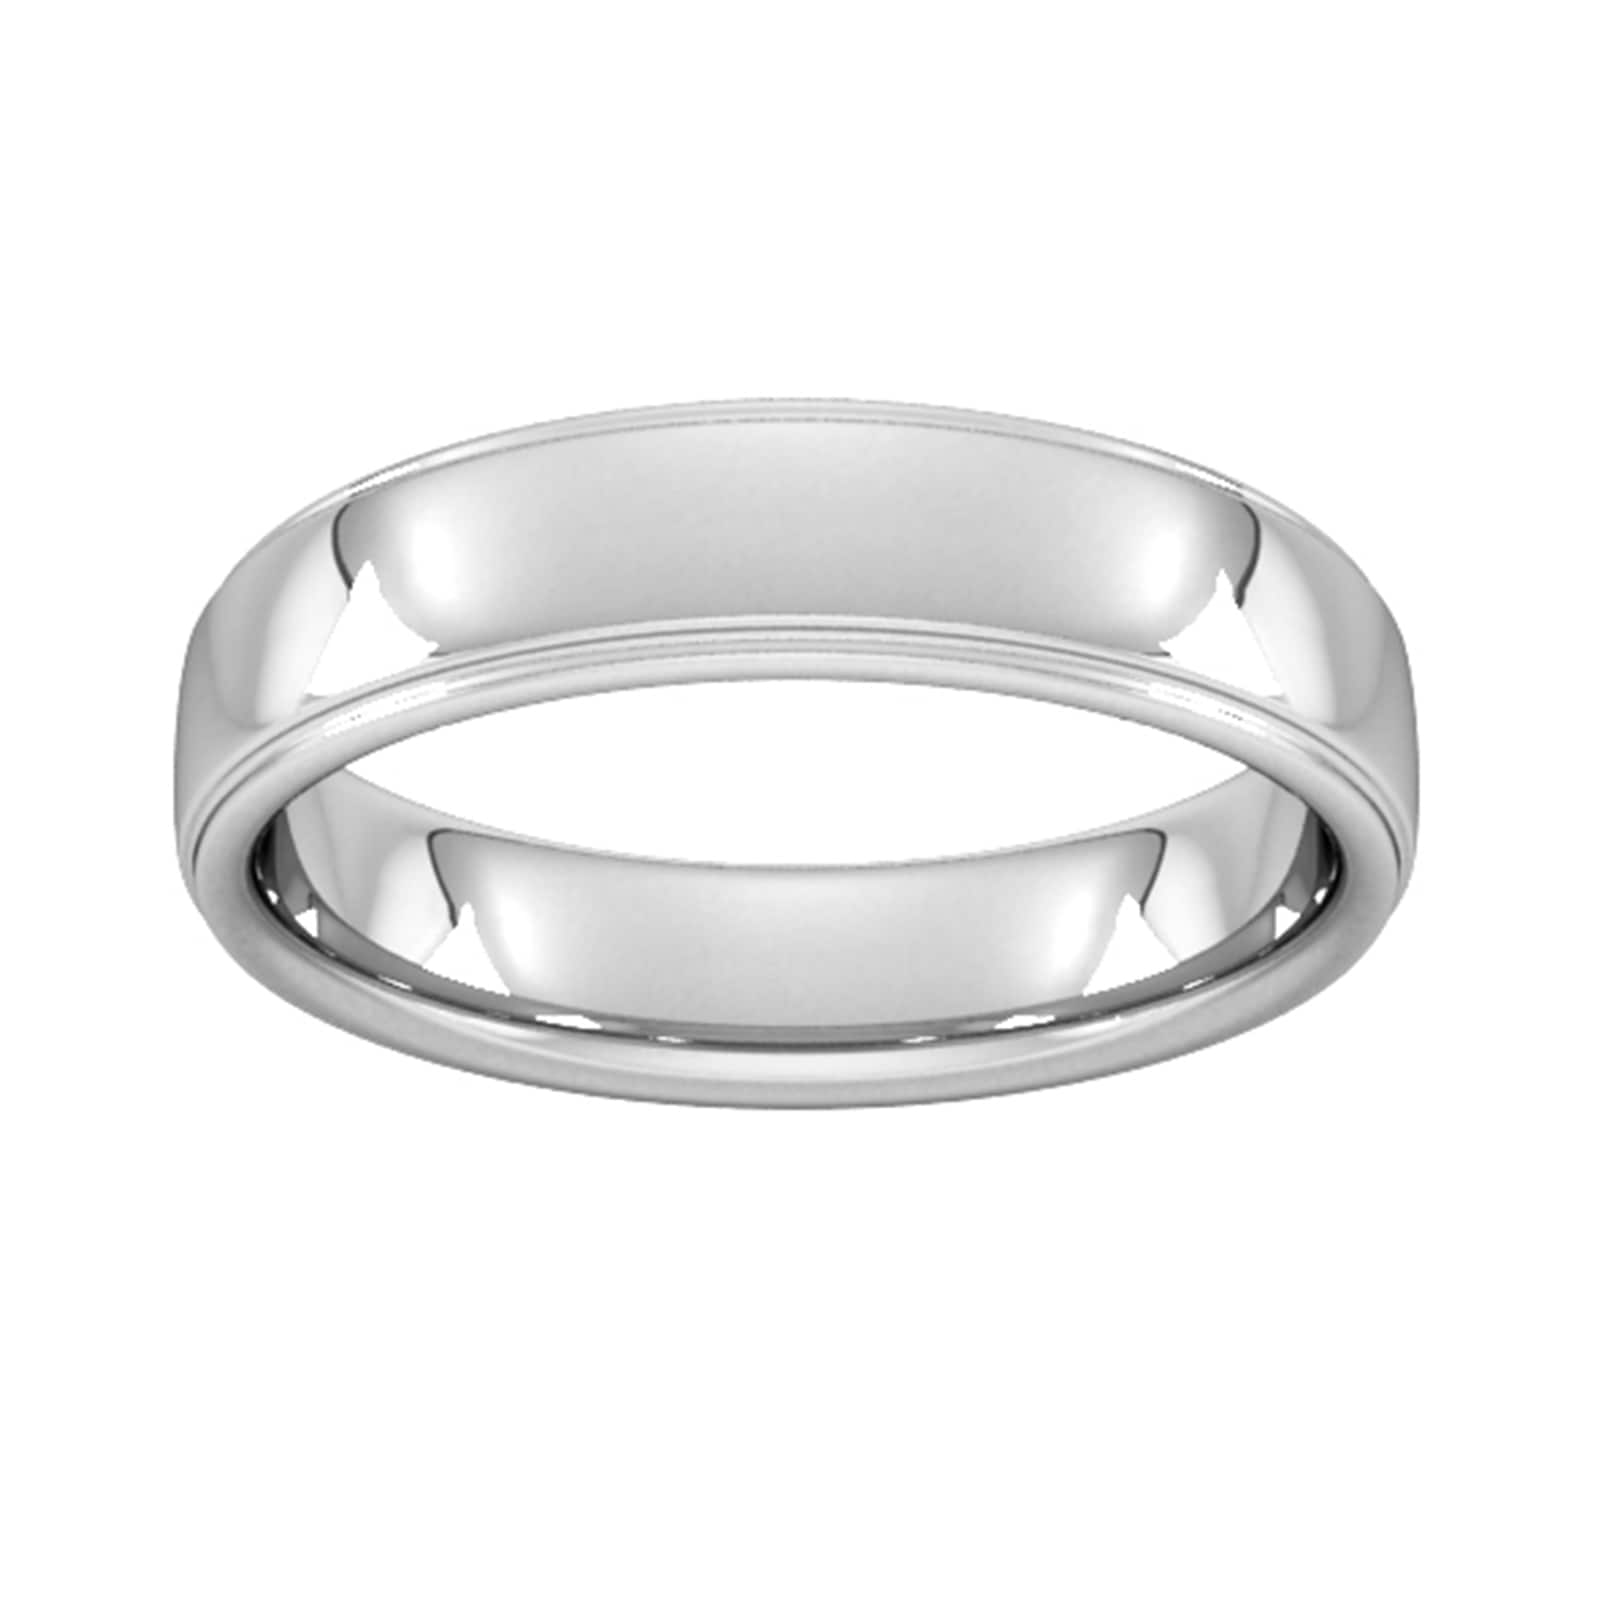 5mm Slight Court Extra Heavy Polished Finish With Grooves Wedding Ring In 9 Carat White Gold - Ring Size R